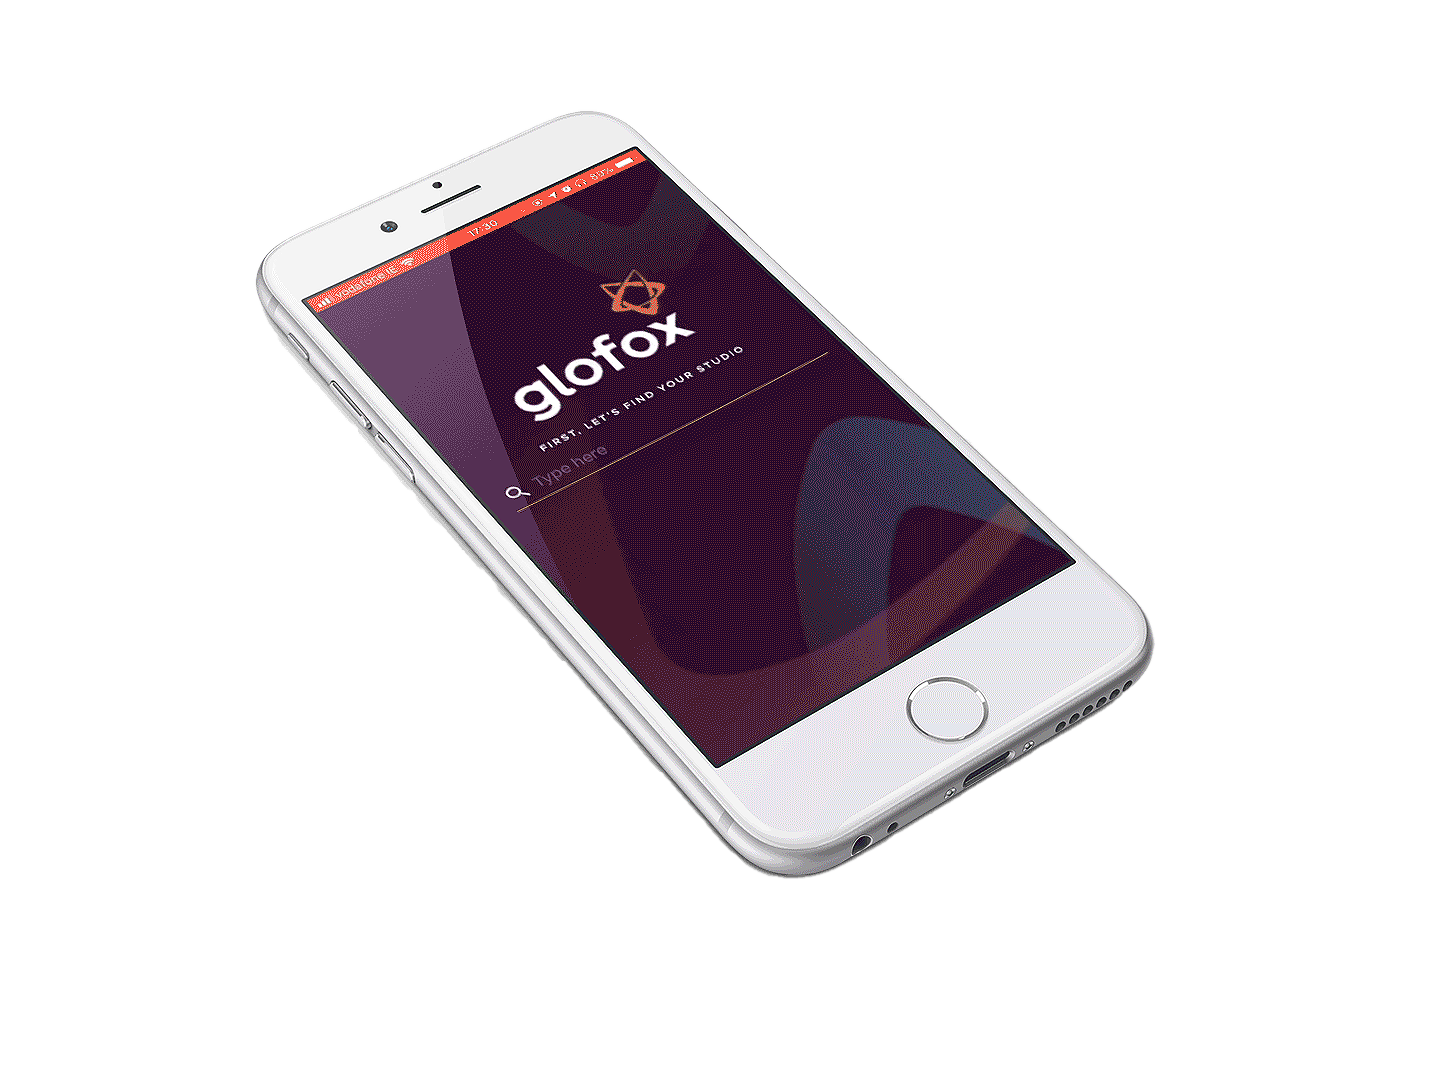 Glofox app for mobile phones. Apple or android